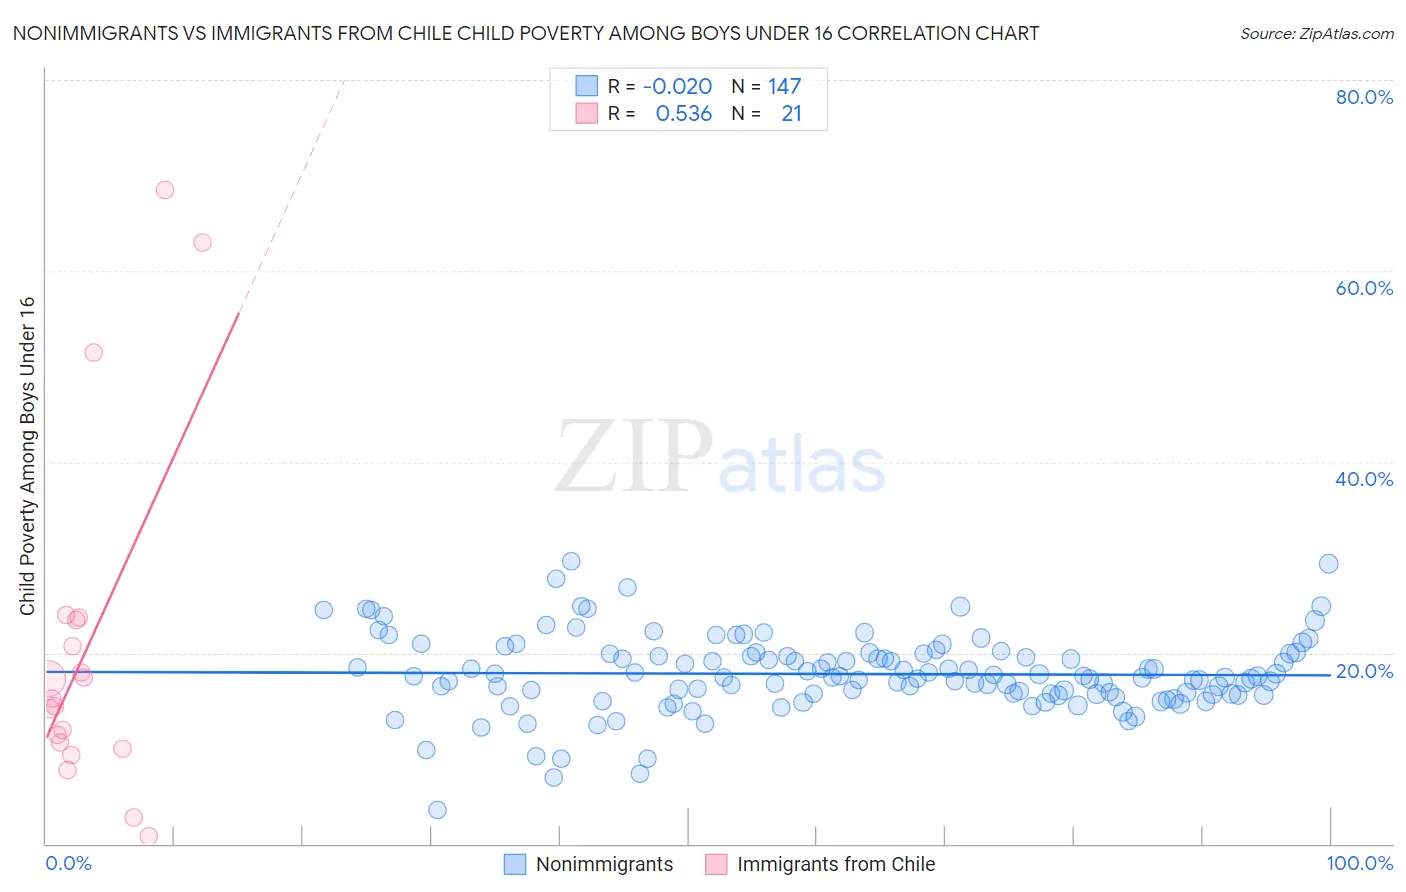 Nonimmigrants vs Immigrants from Chile Child Poverty Among Boys Under 16